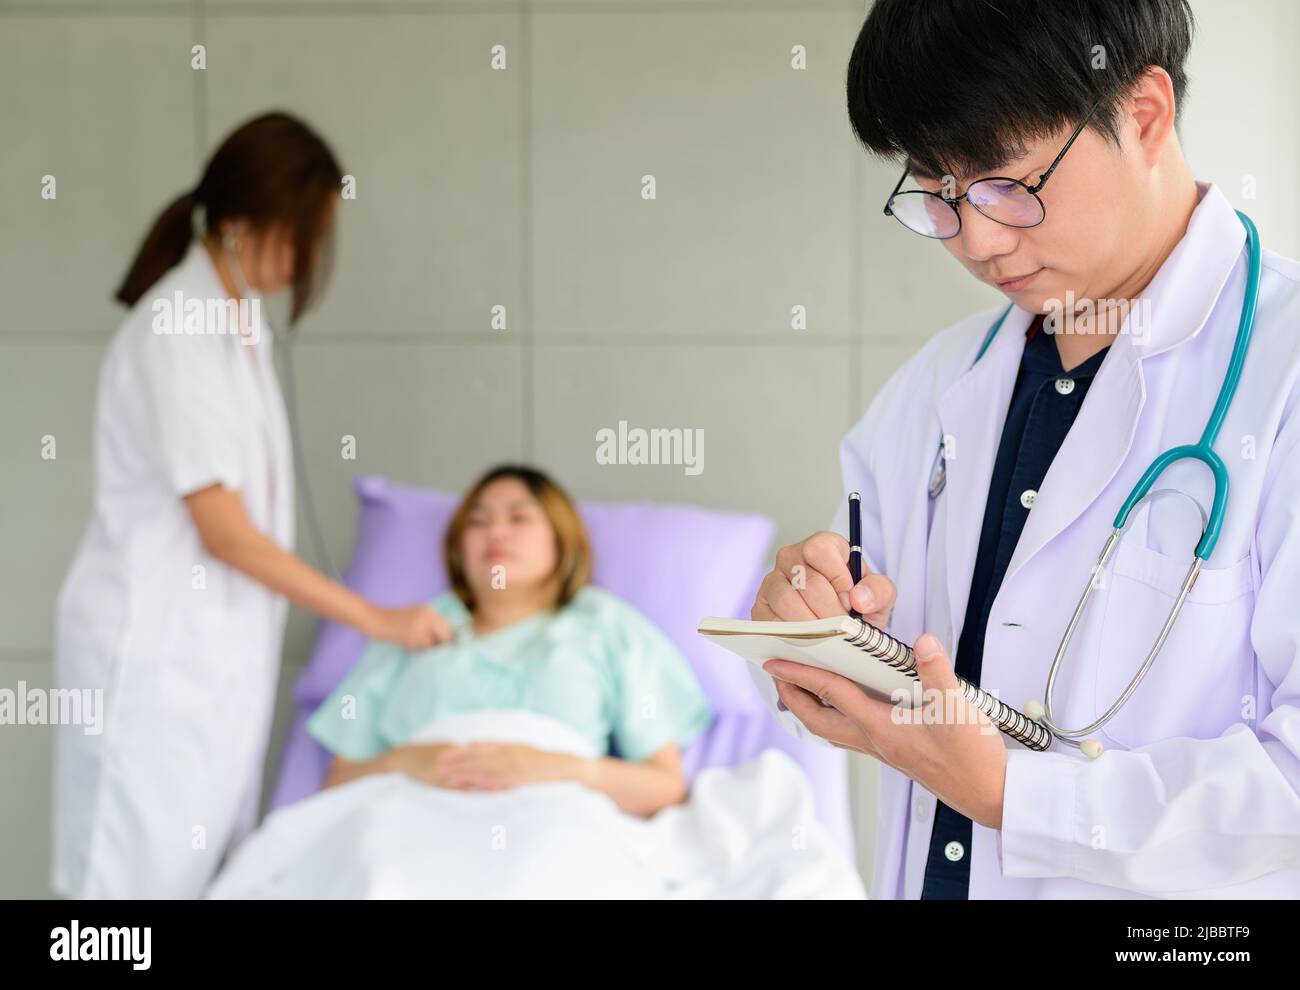 Portrait asian doctor with his colleague and patient in the background Stock Photo